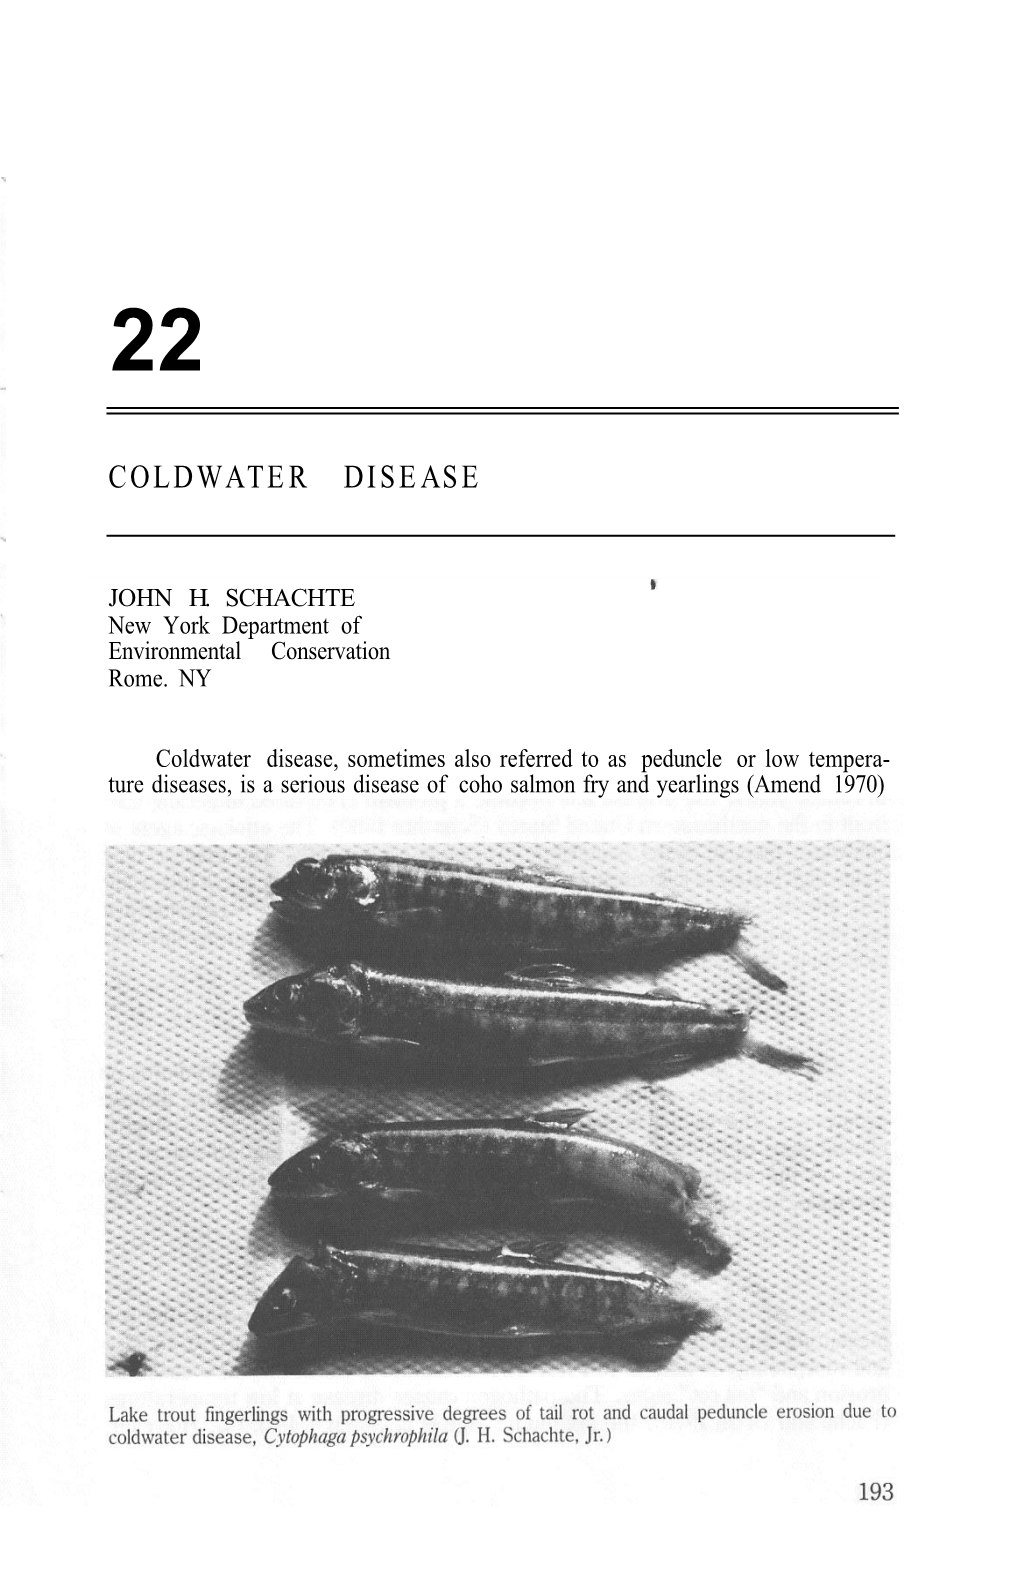 Coldwater Disease